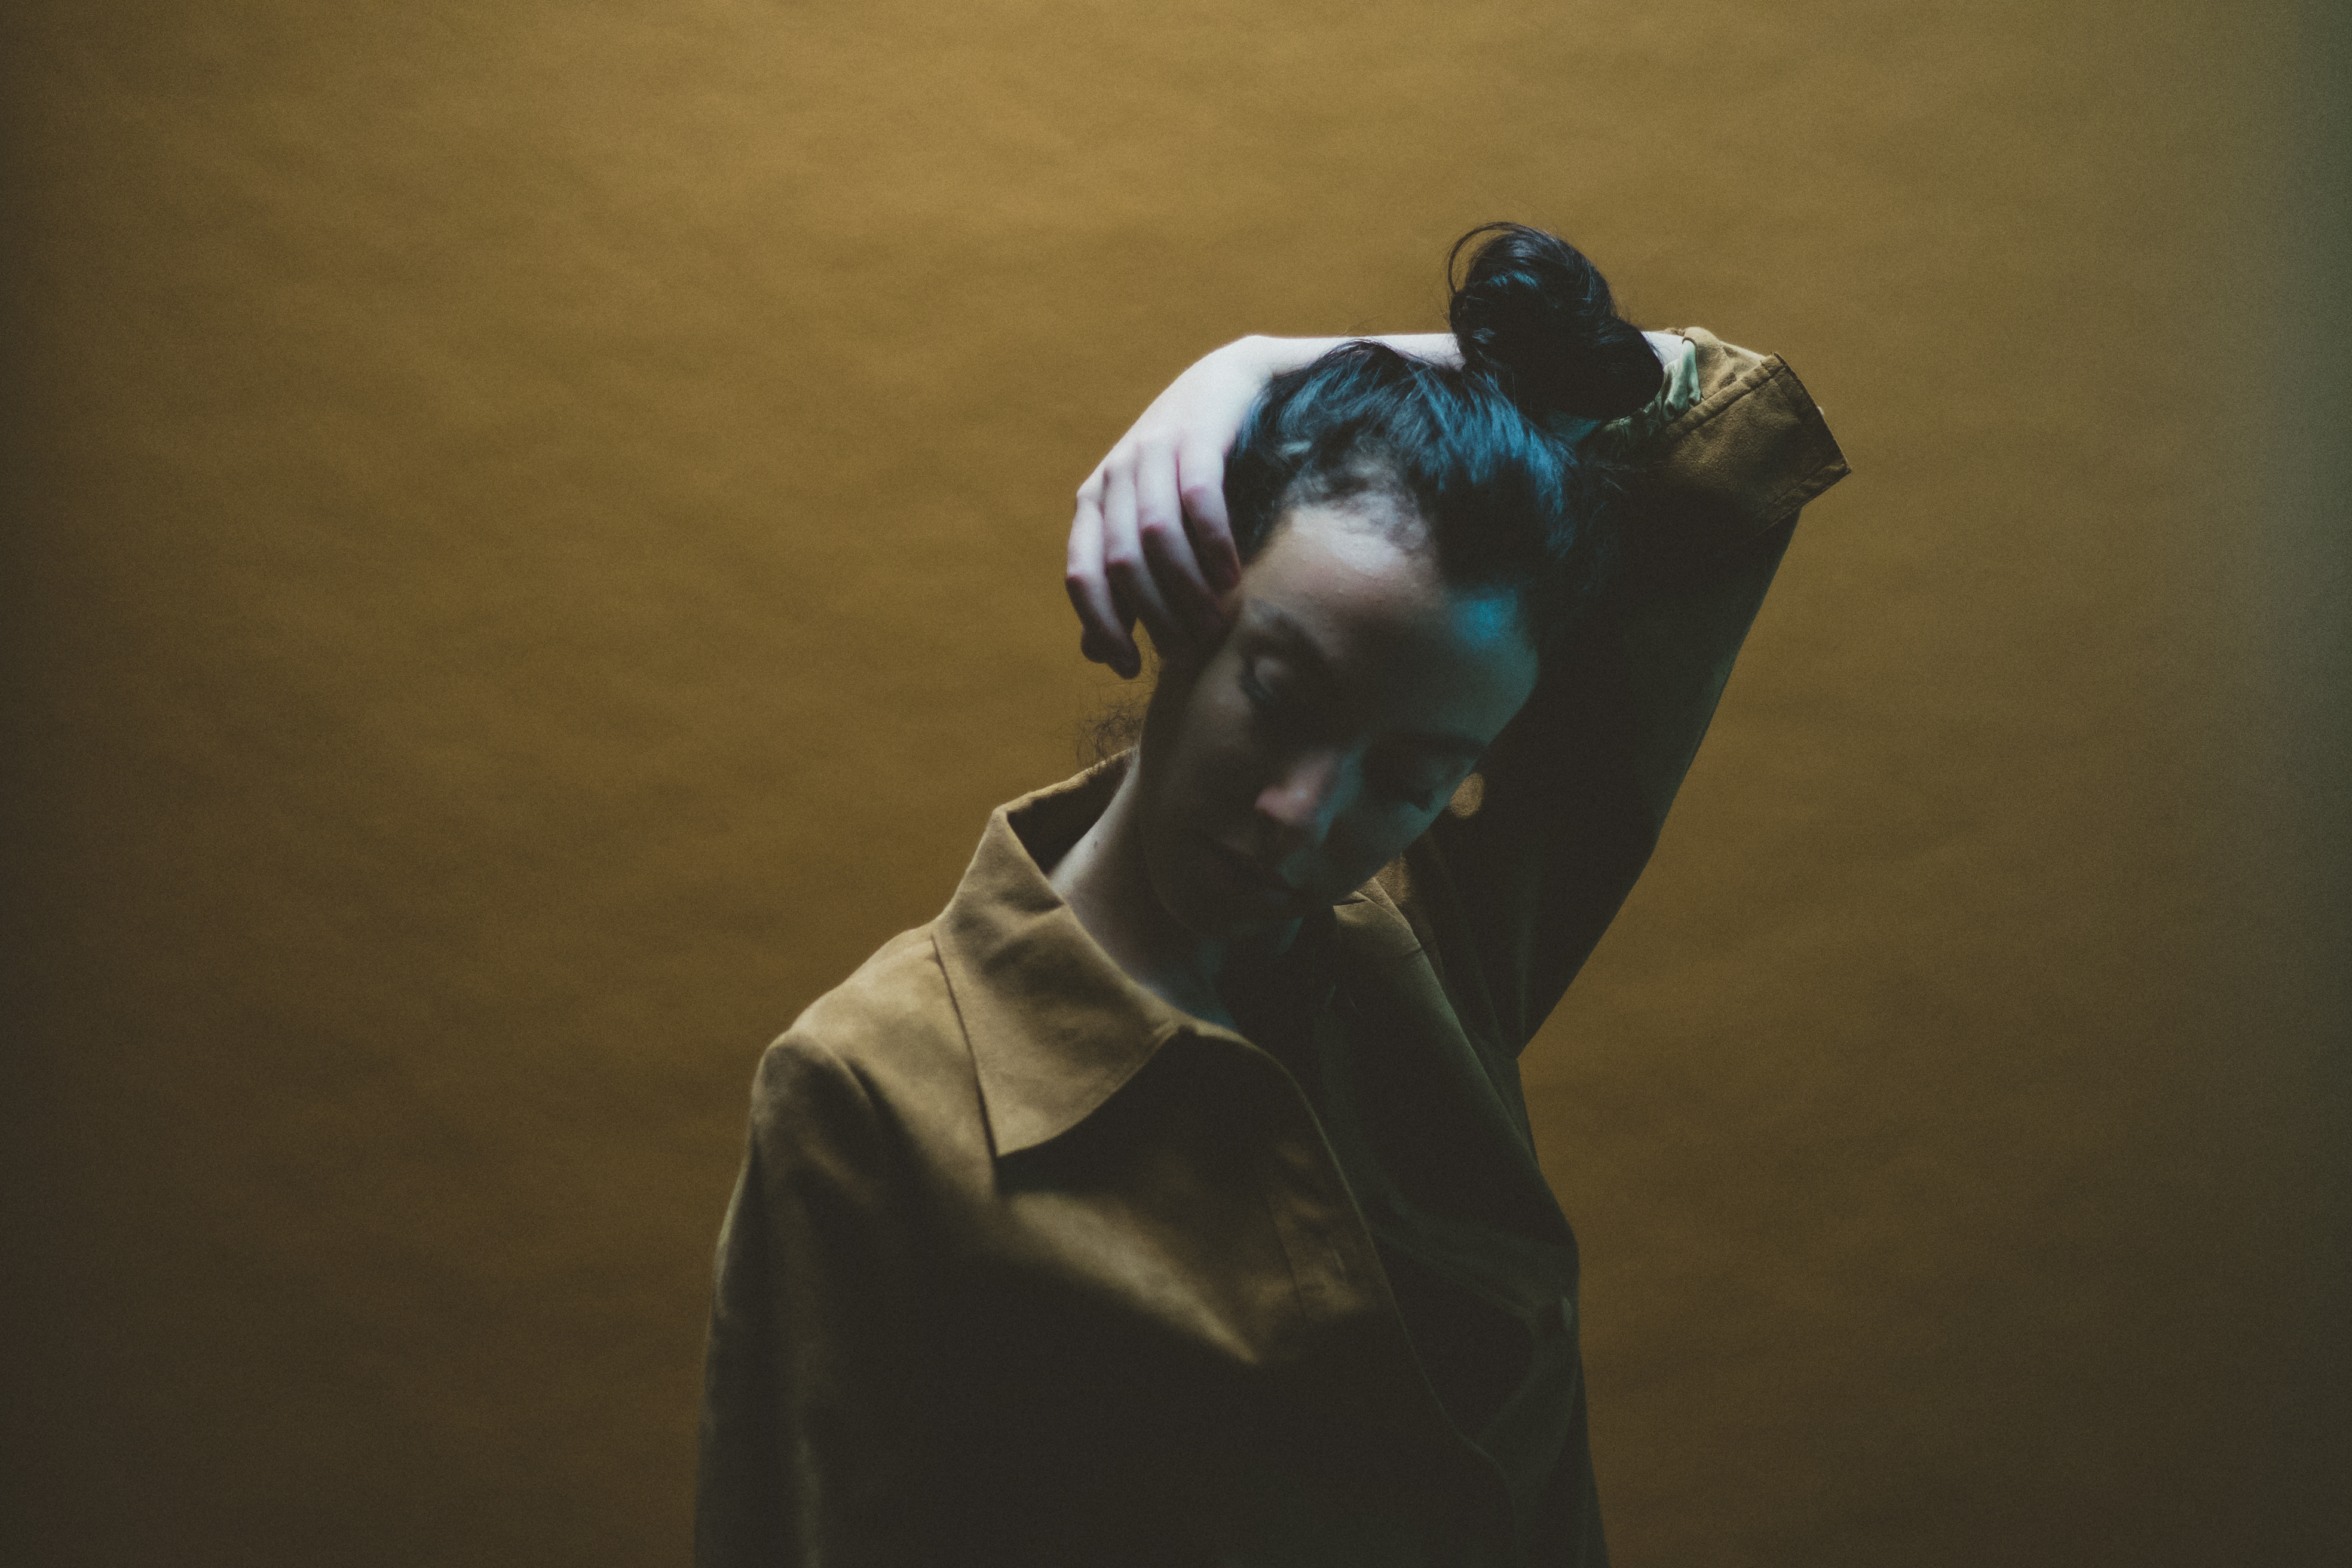 Track By Track: Rodes Rollins on her Young Adult EP